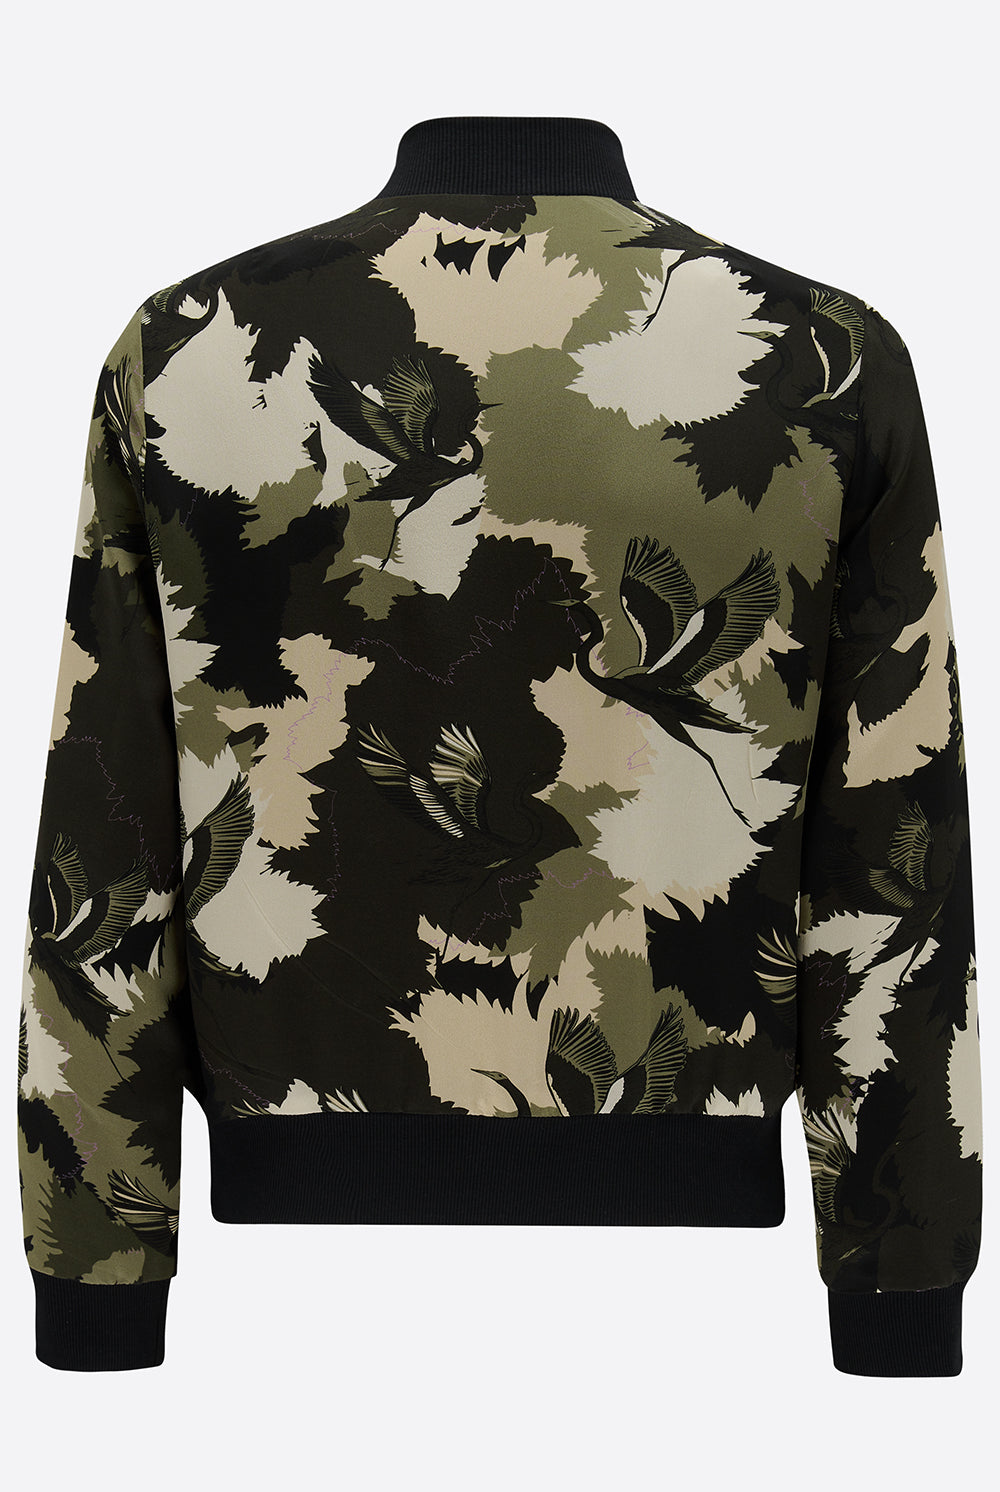 The back of a silk mens bomber jacket in a cream and green camouflage print with a stalk design